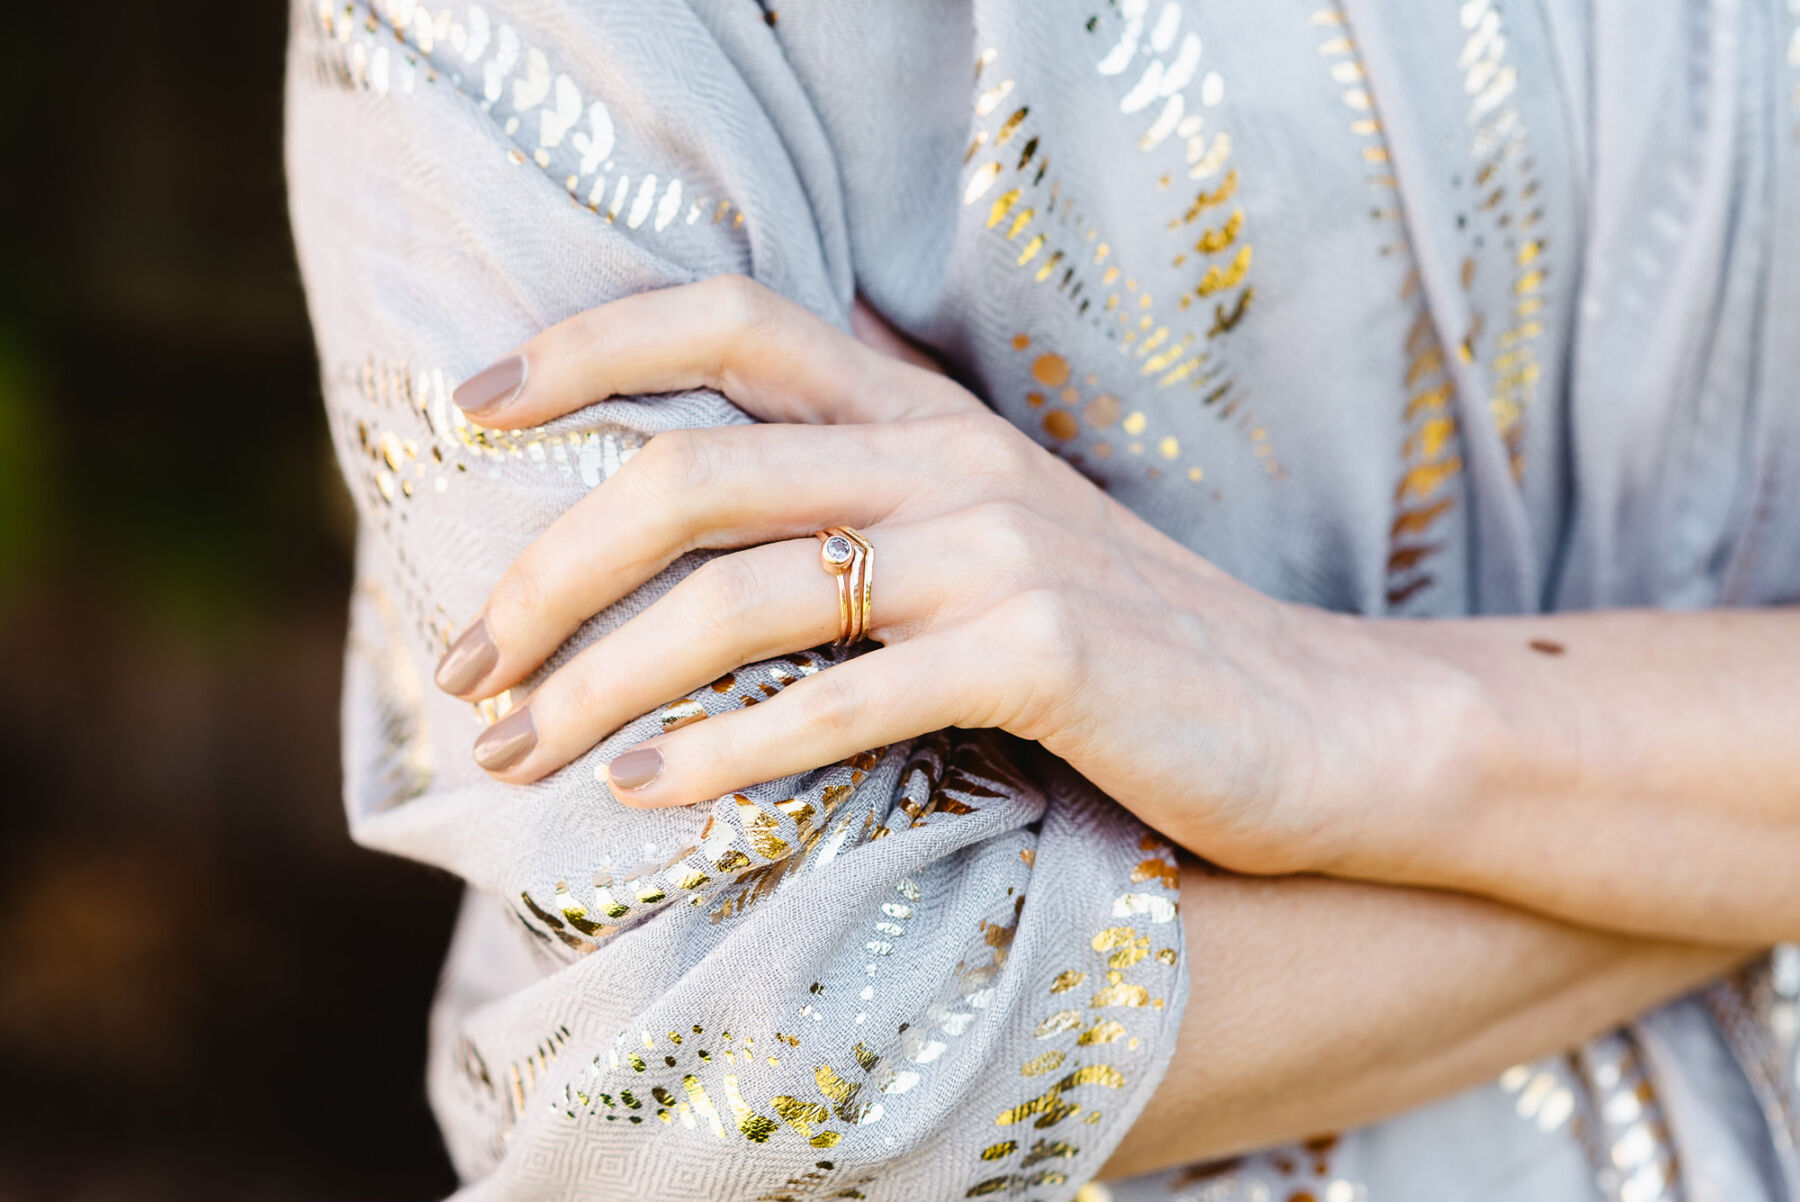 Ethical fairtrade recycled gold wedding rings by Nikki Stark